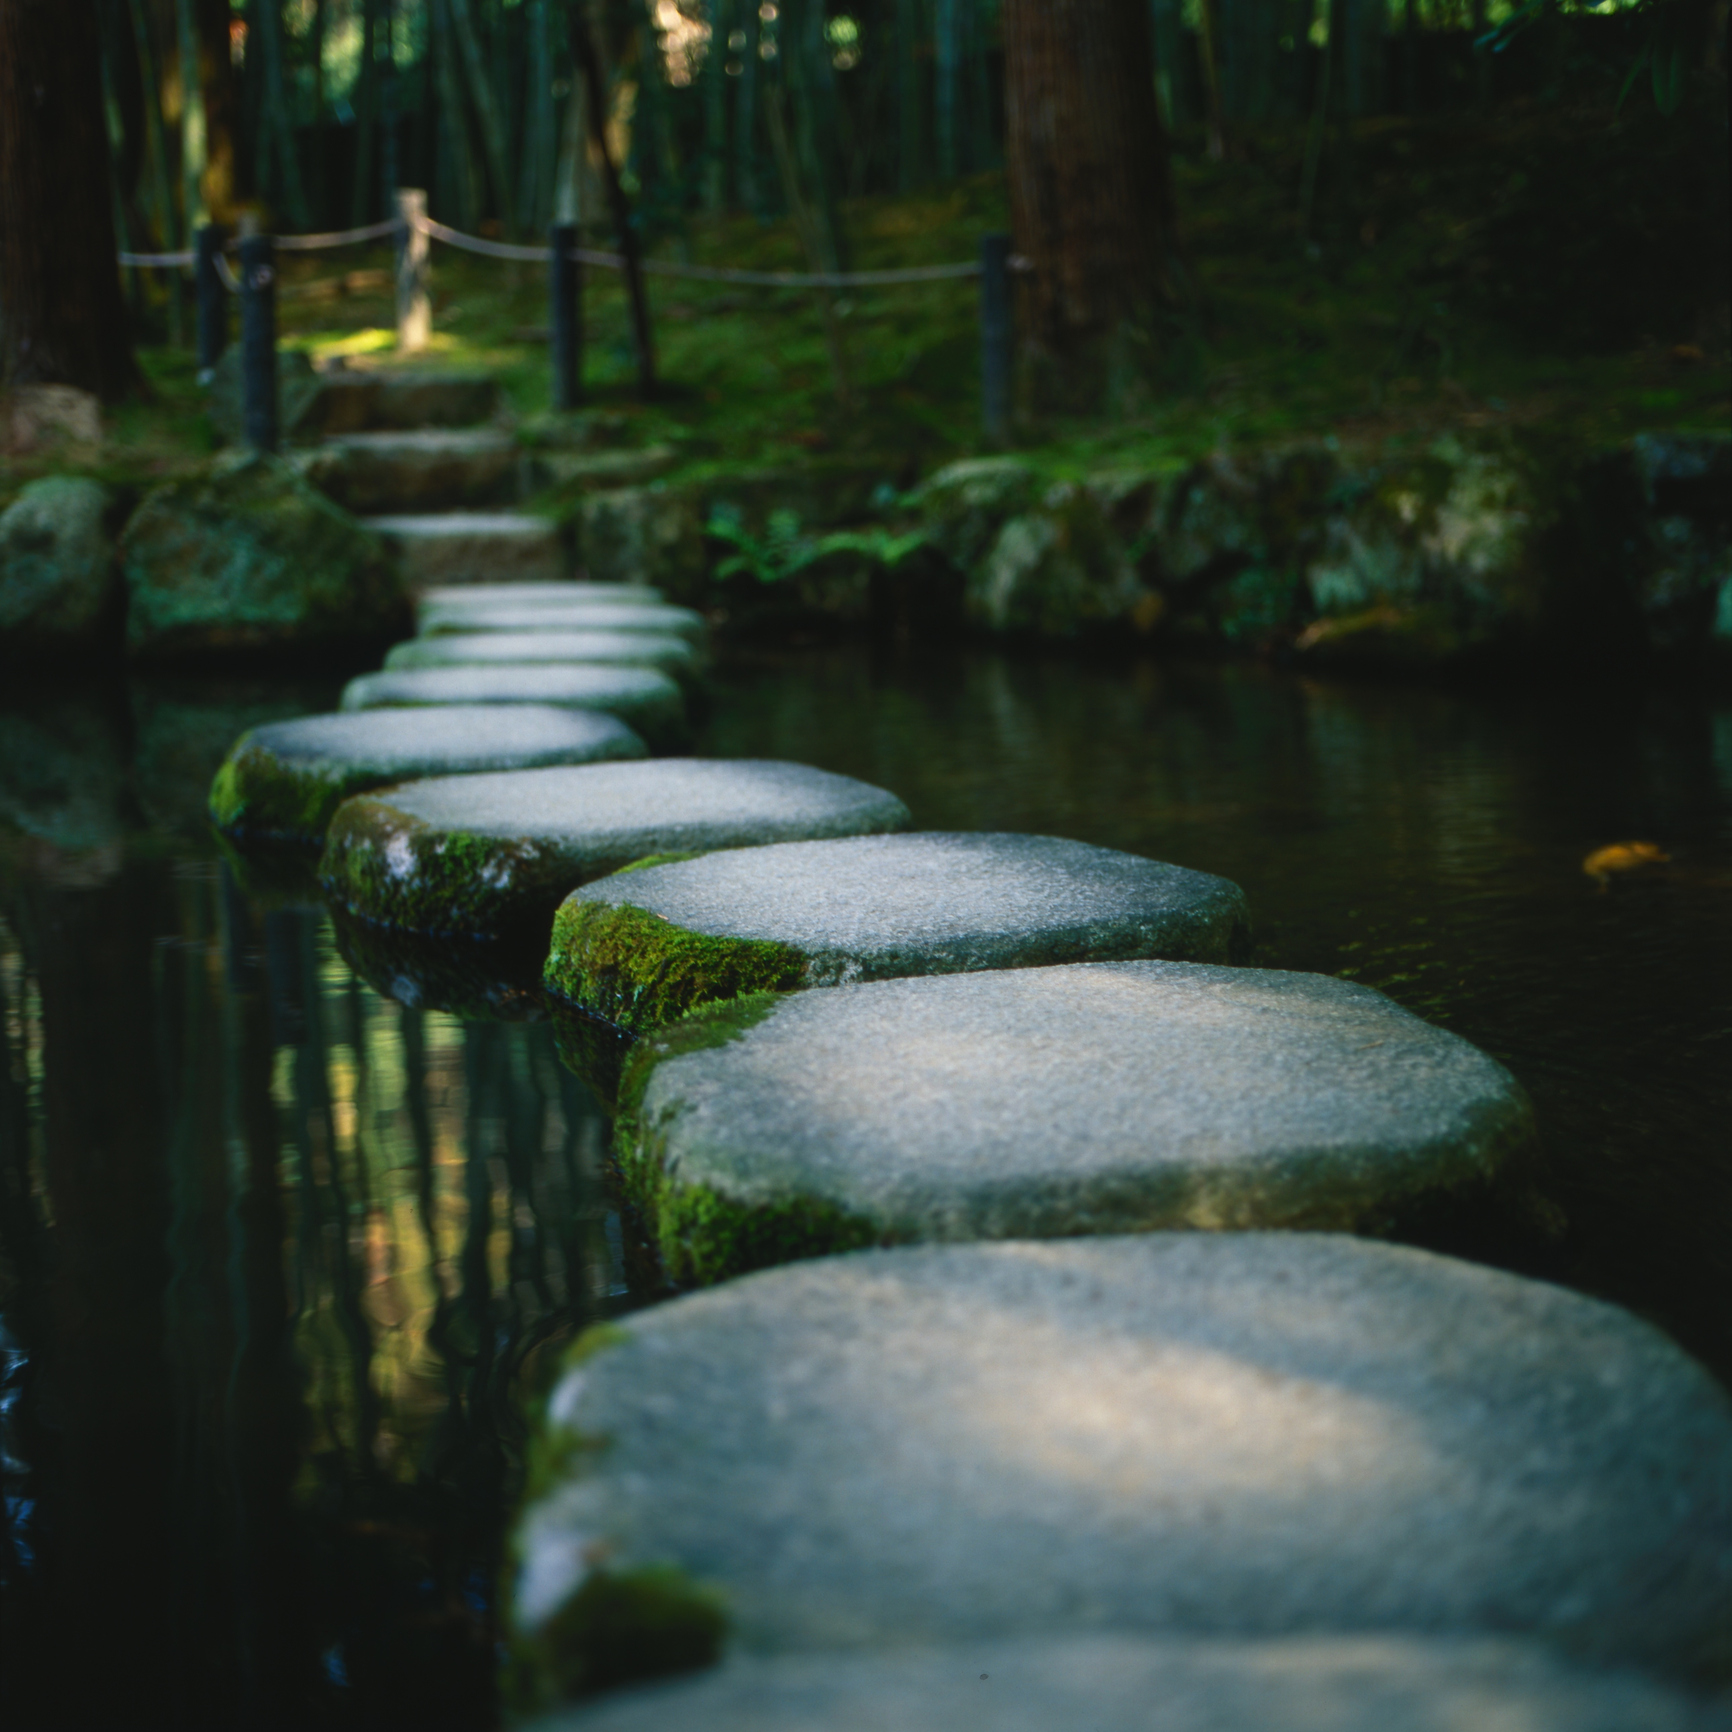 Kyoto, Japan - October 10, 2010: Stepping stones across a pond in a Zen temple garden.